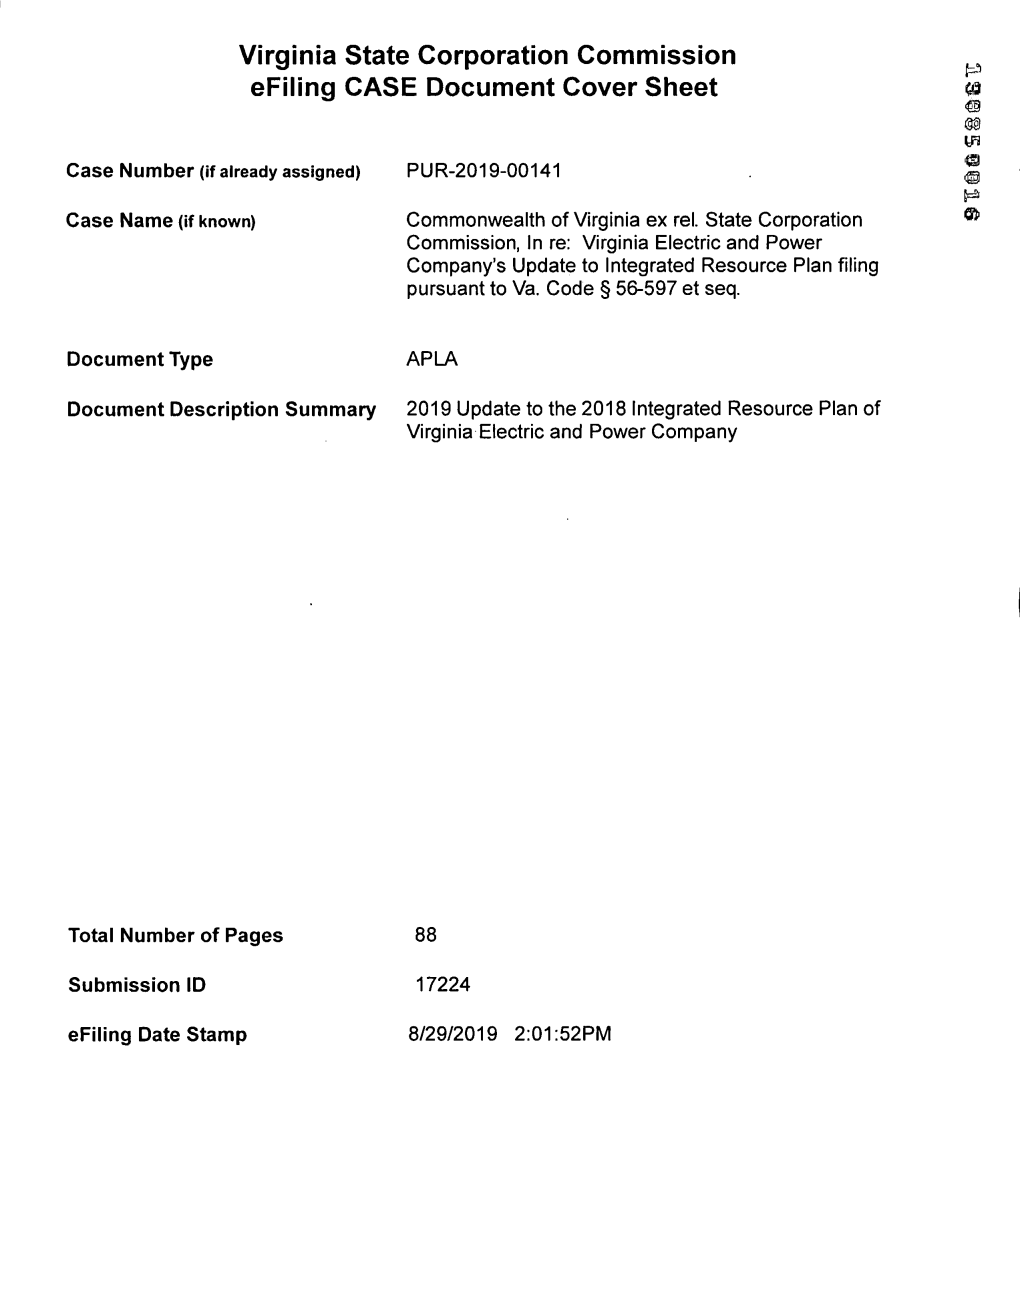 Virginia State Corporation Commission Efiling CASE Document Cover Sheet